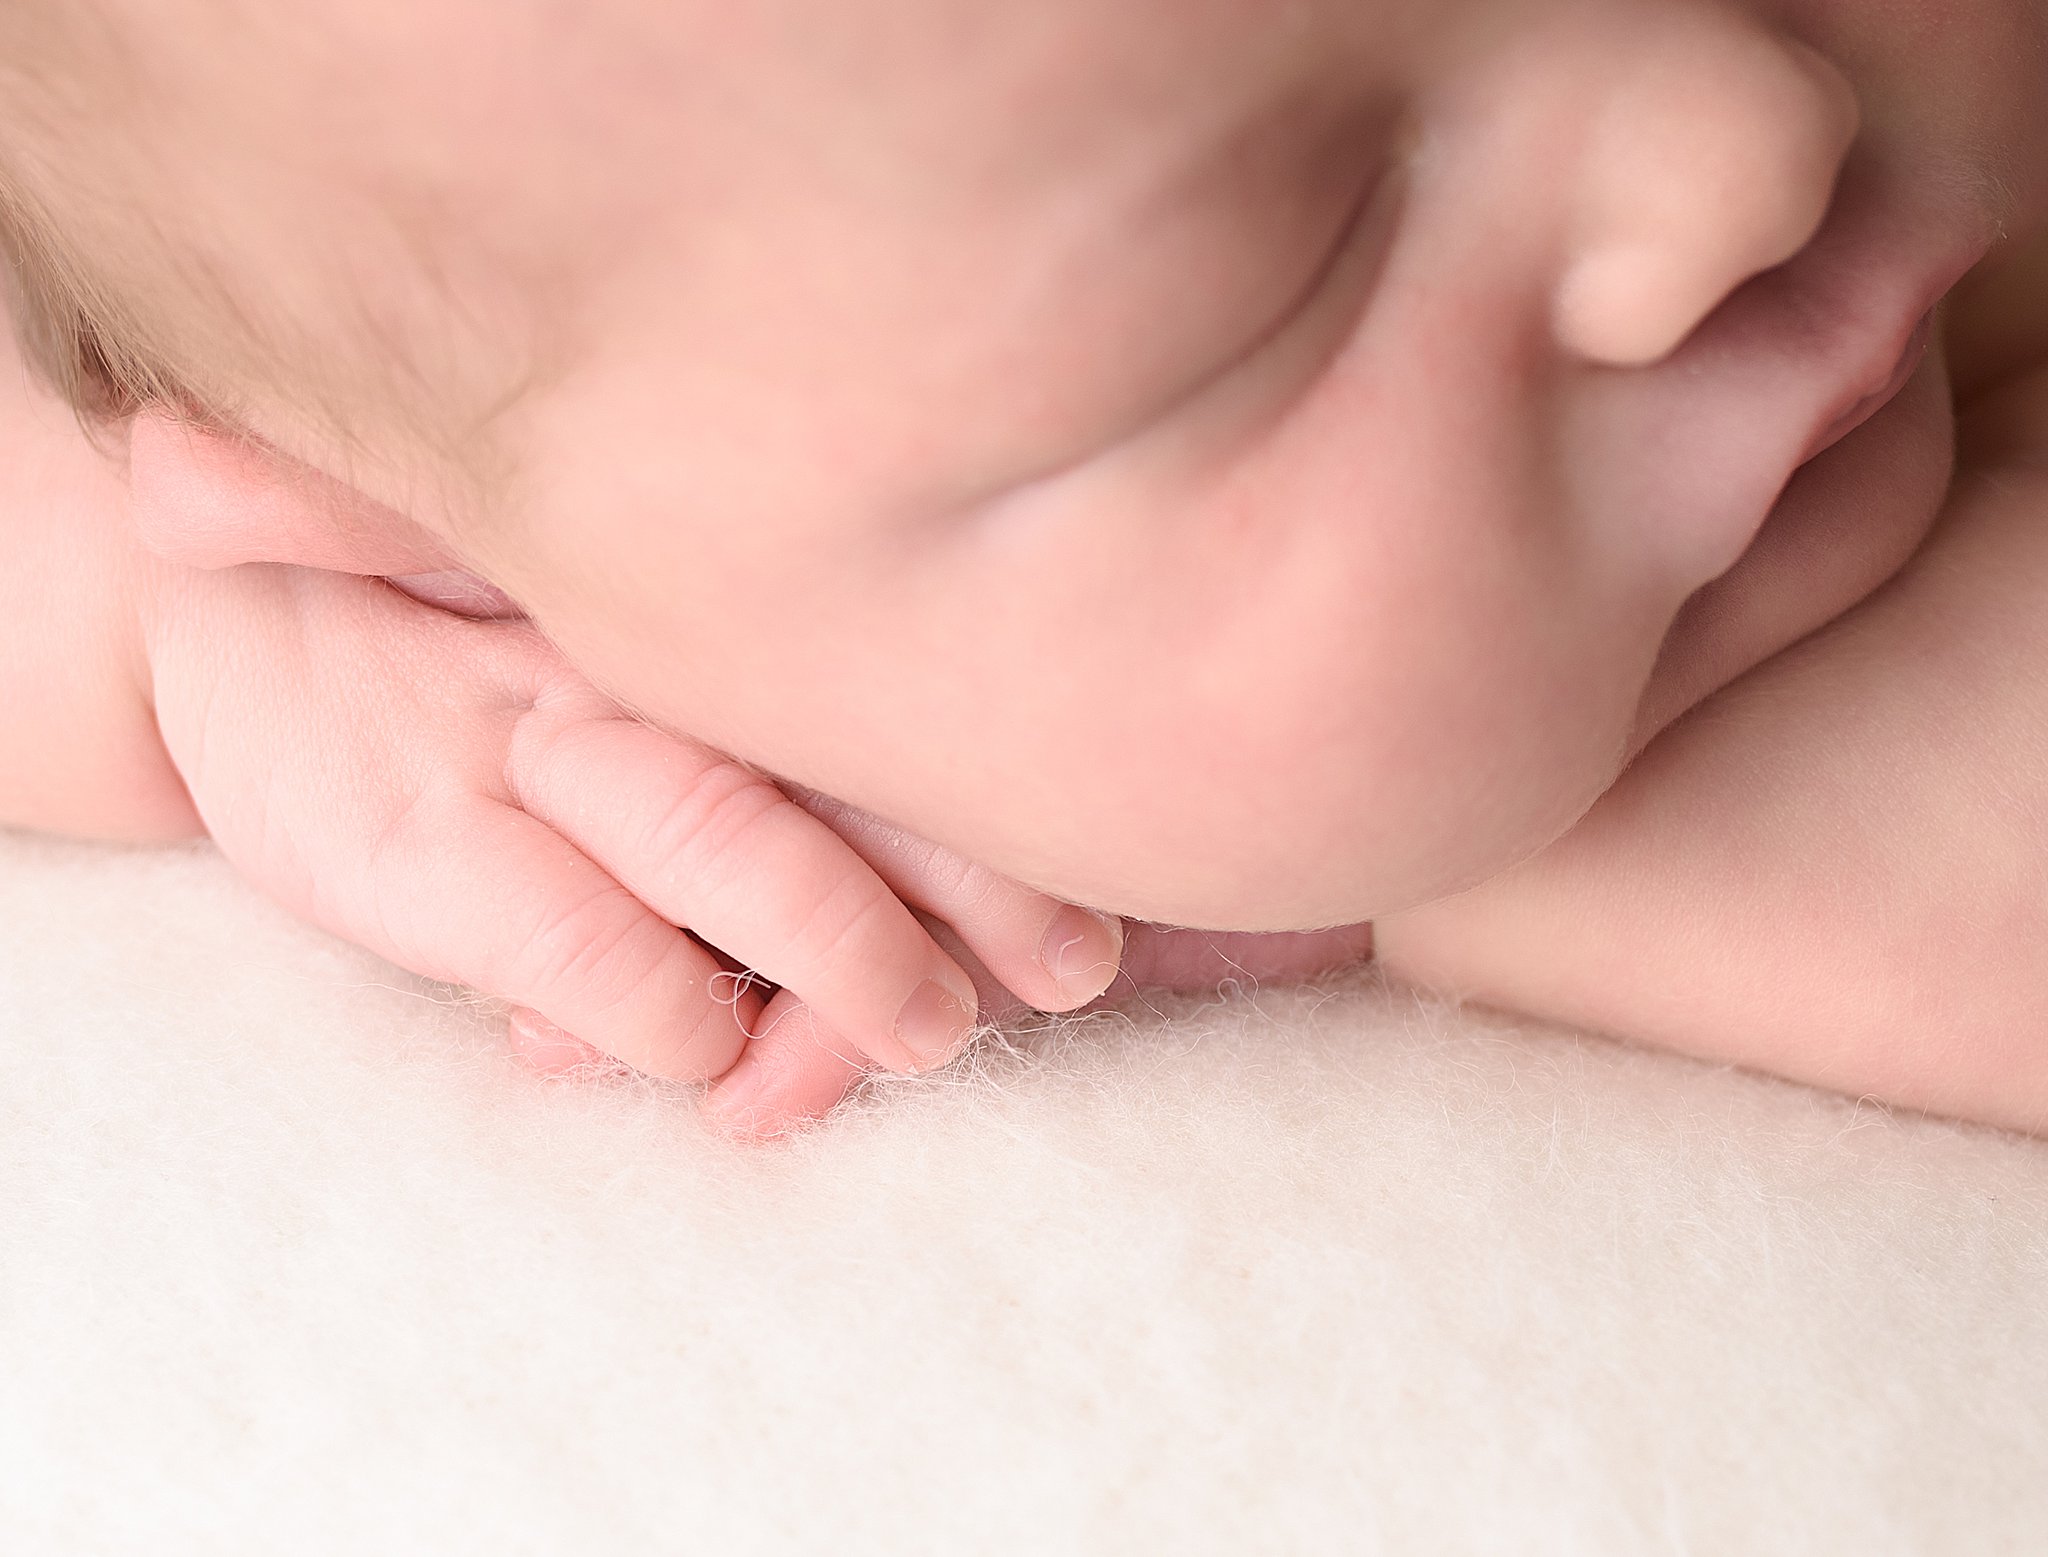 Details of a newborn baby sleeping on its hands before using san diego daycares